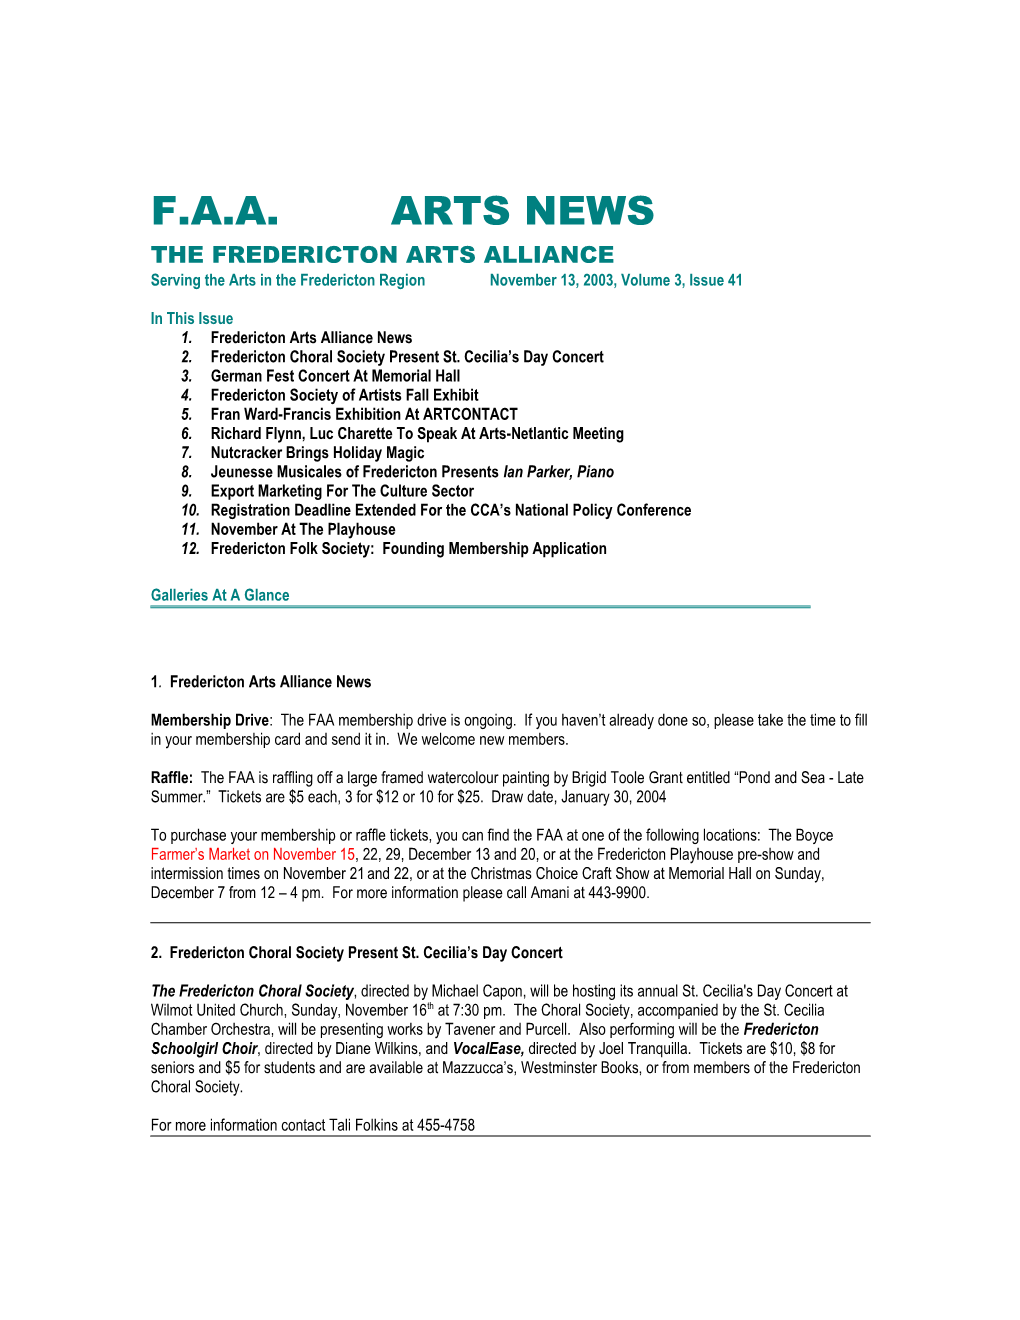 F.A.A. ARTS NEWS the FREDERICTON ARTS ALLIANCE Serving the Arts in the Fredericton Region November 13, 2003, Volume 3, Issue 41